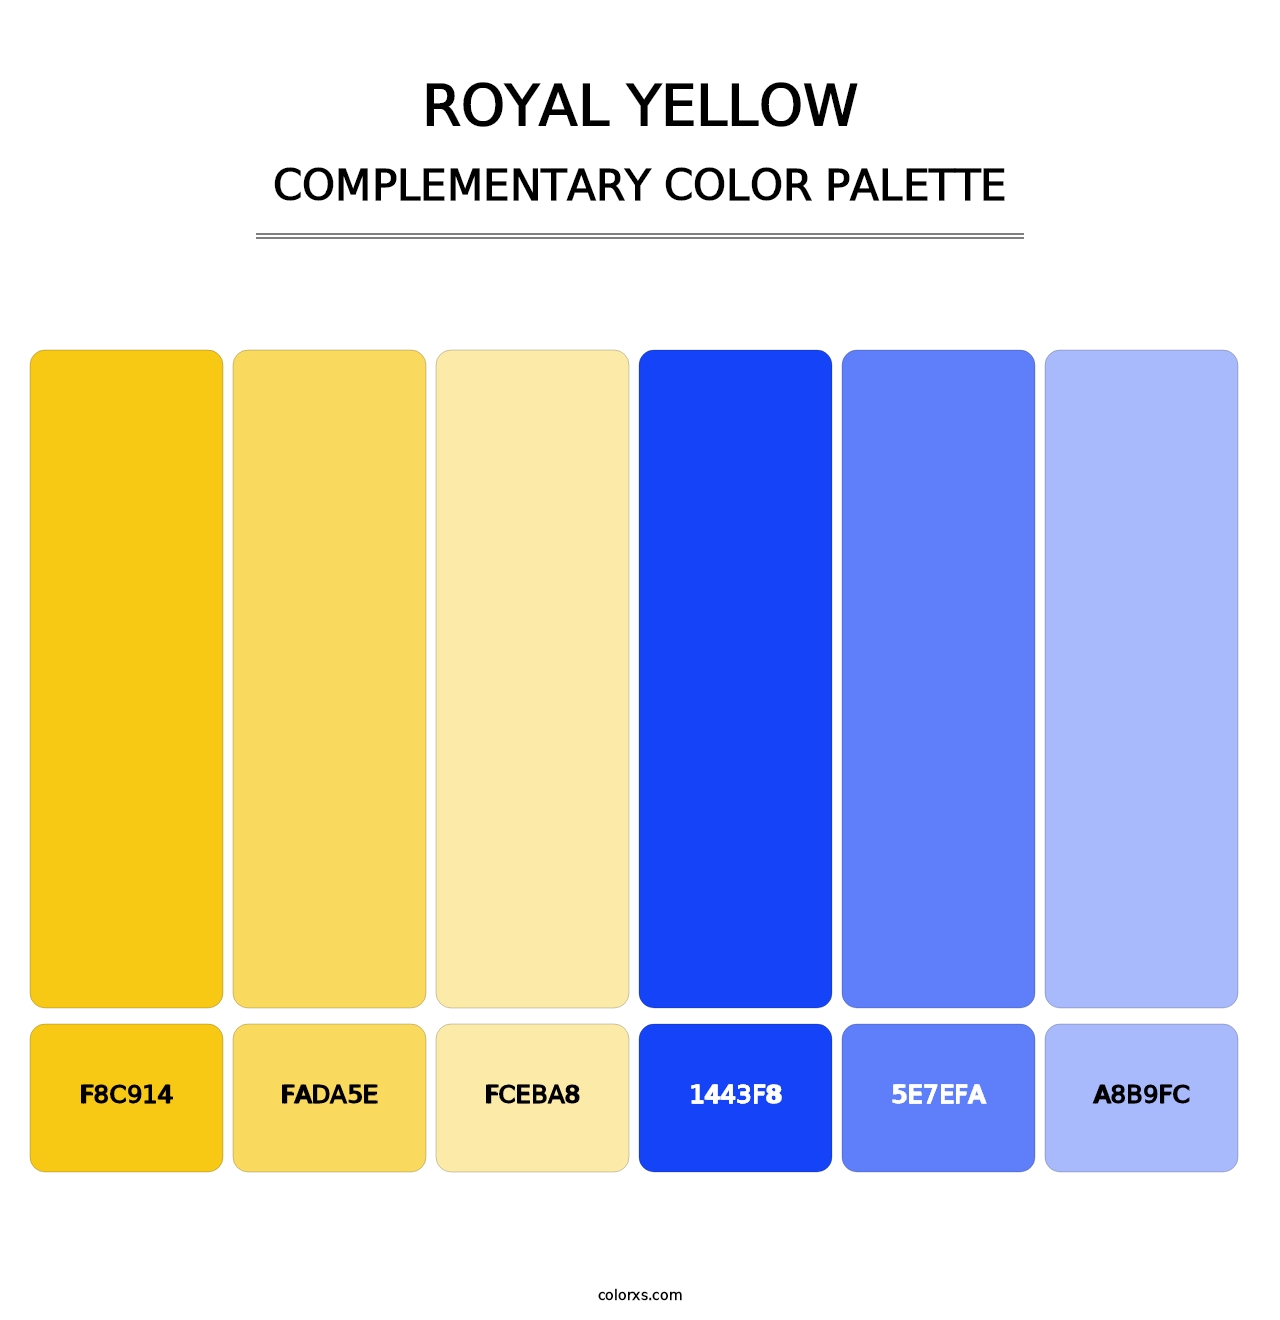 Royal Yellow - Complementary Color Palette